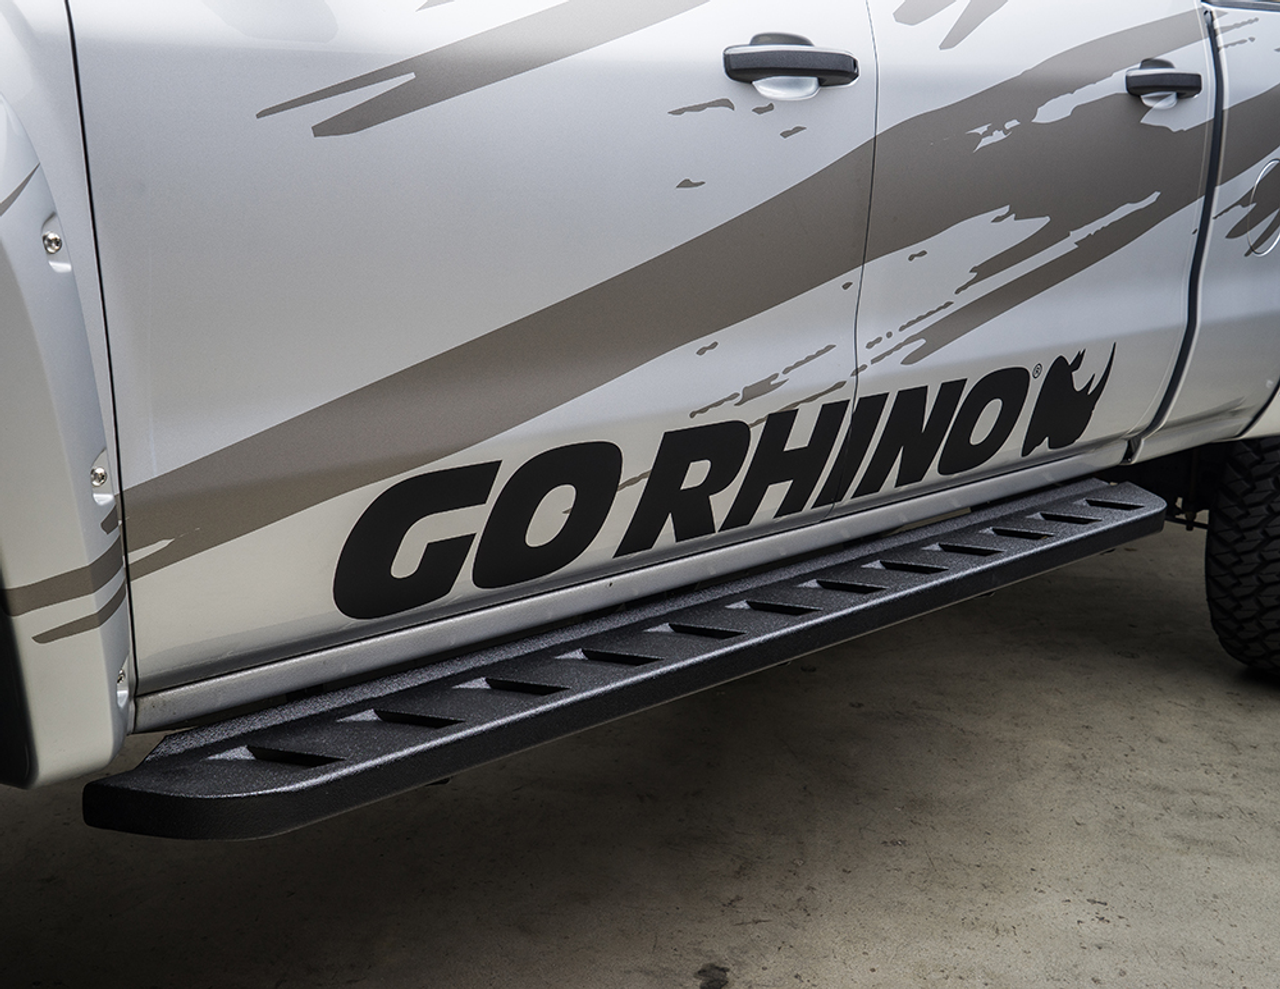 Go Rhino 6341558720T Ford, F-150 Raptor, 2017 - 2021, RB10 Running boards - Complete Kit:  2 pair RB10 Drop Steps, Galvanized Steel, Protective Bedliner coating, 630087T RB10 + 6941555 RB Brackets + (2) 69420000T Drop Down Step